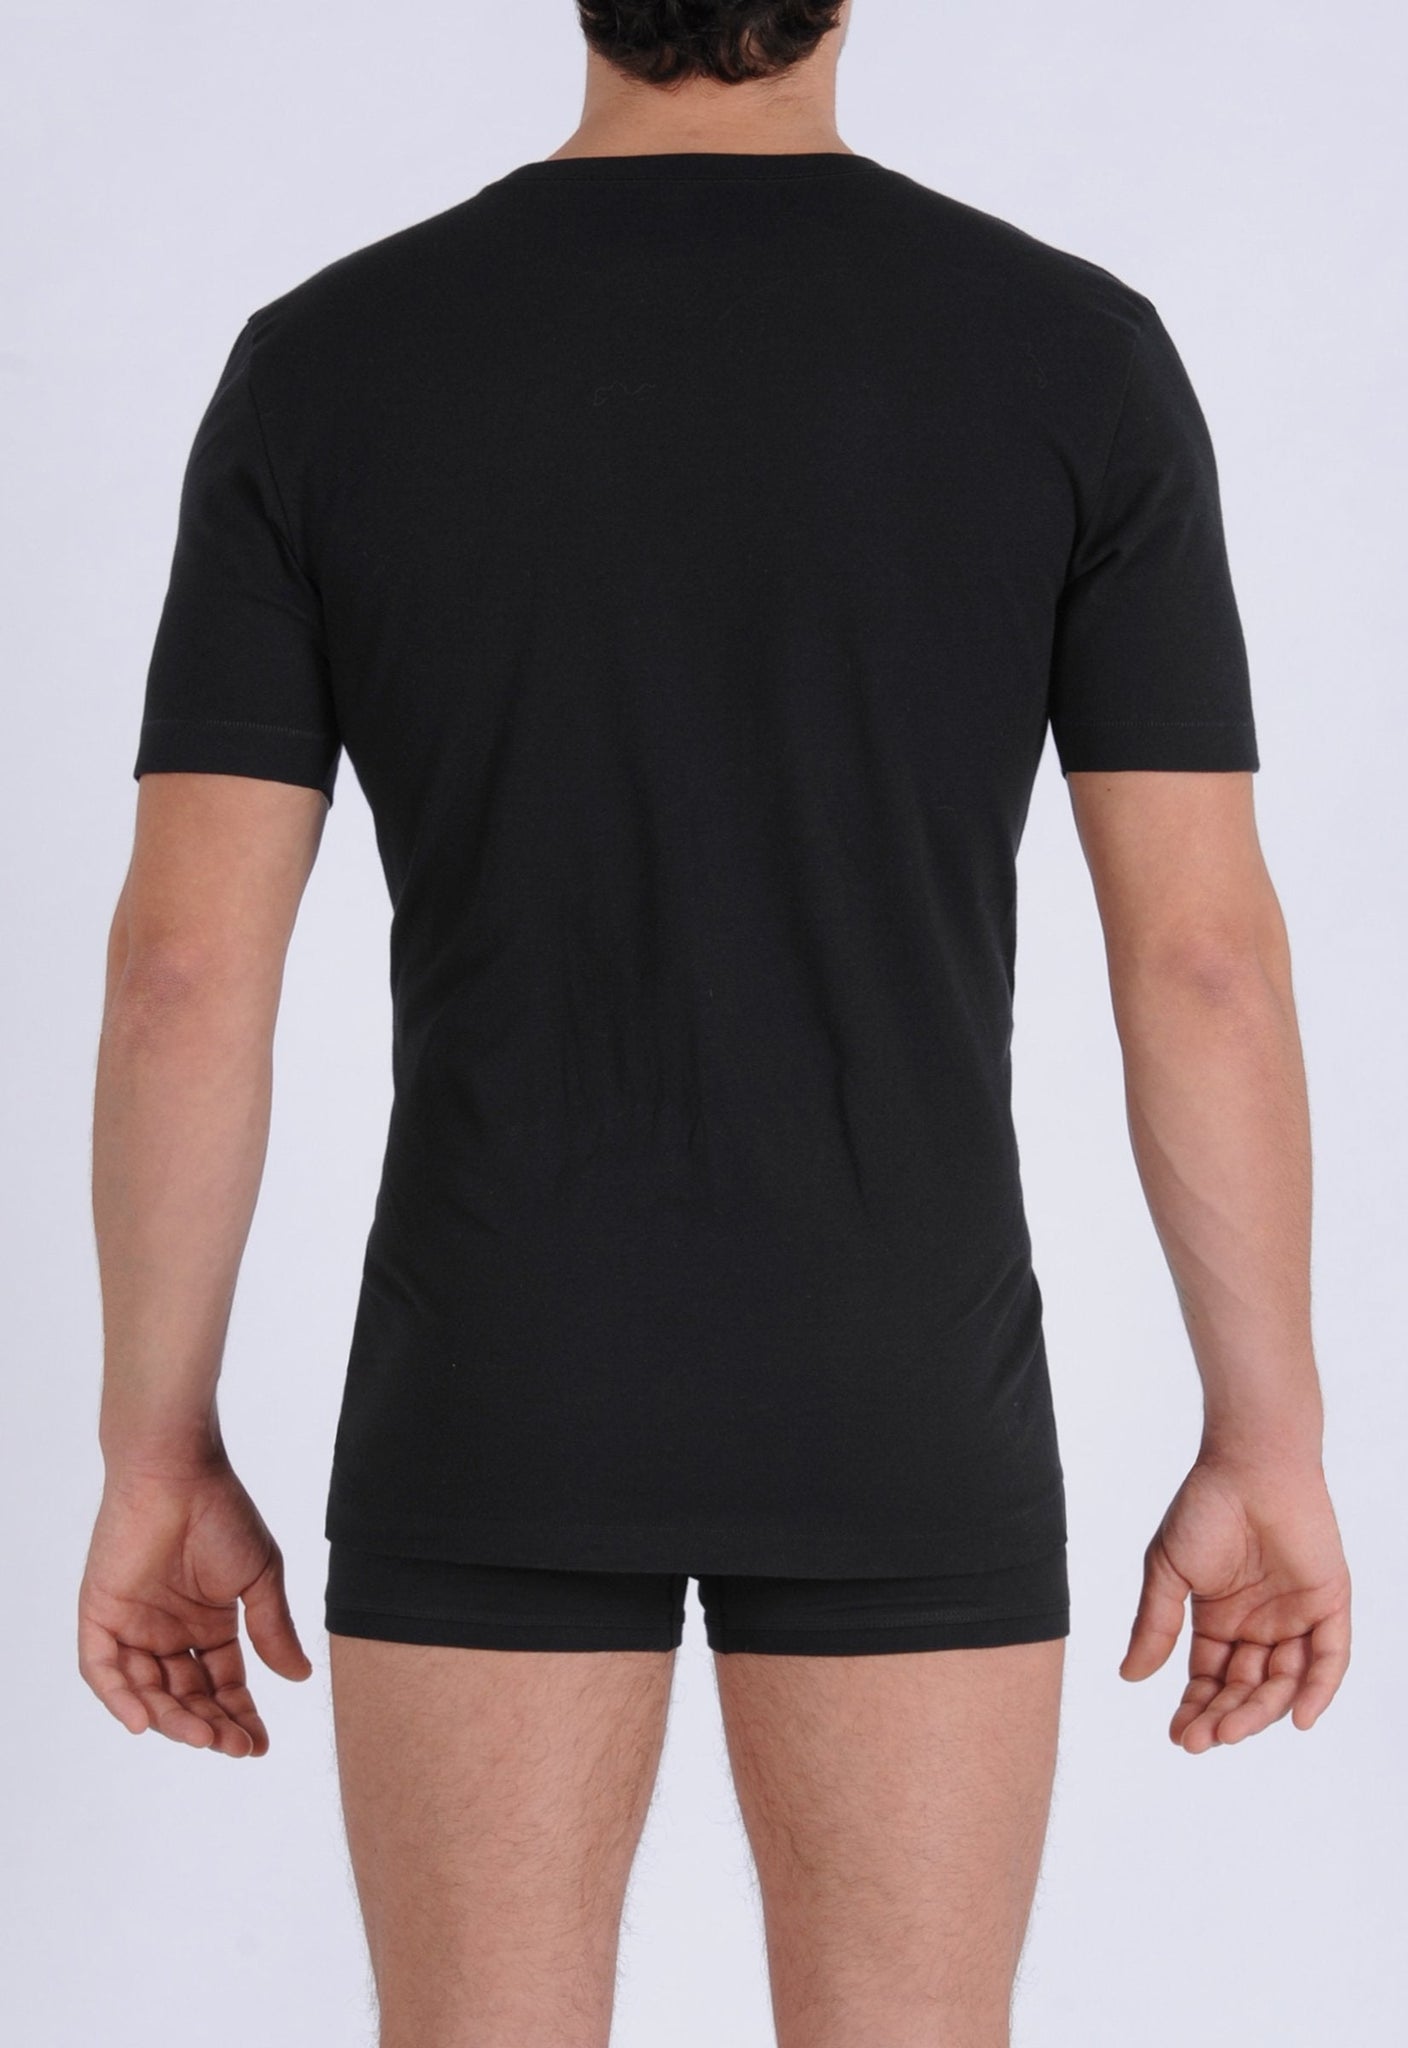 Ginch Gonch Signature Series - Crew Neck T-Shirt Black Back